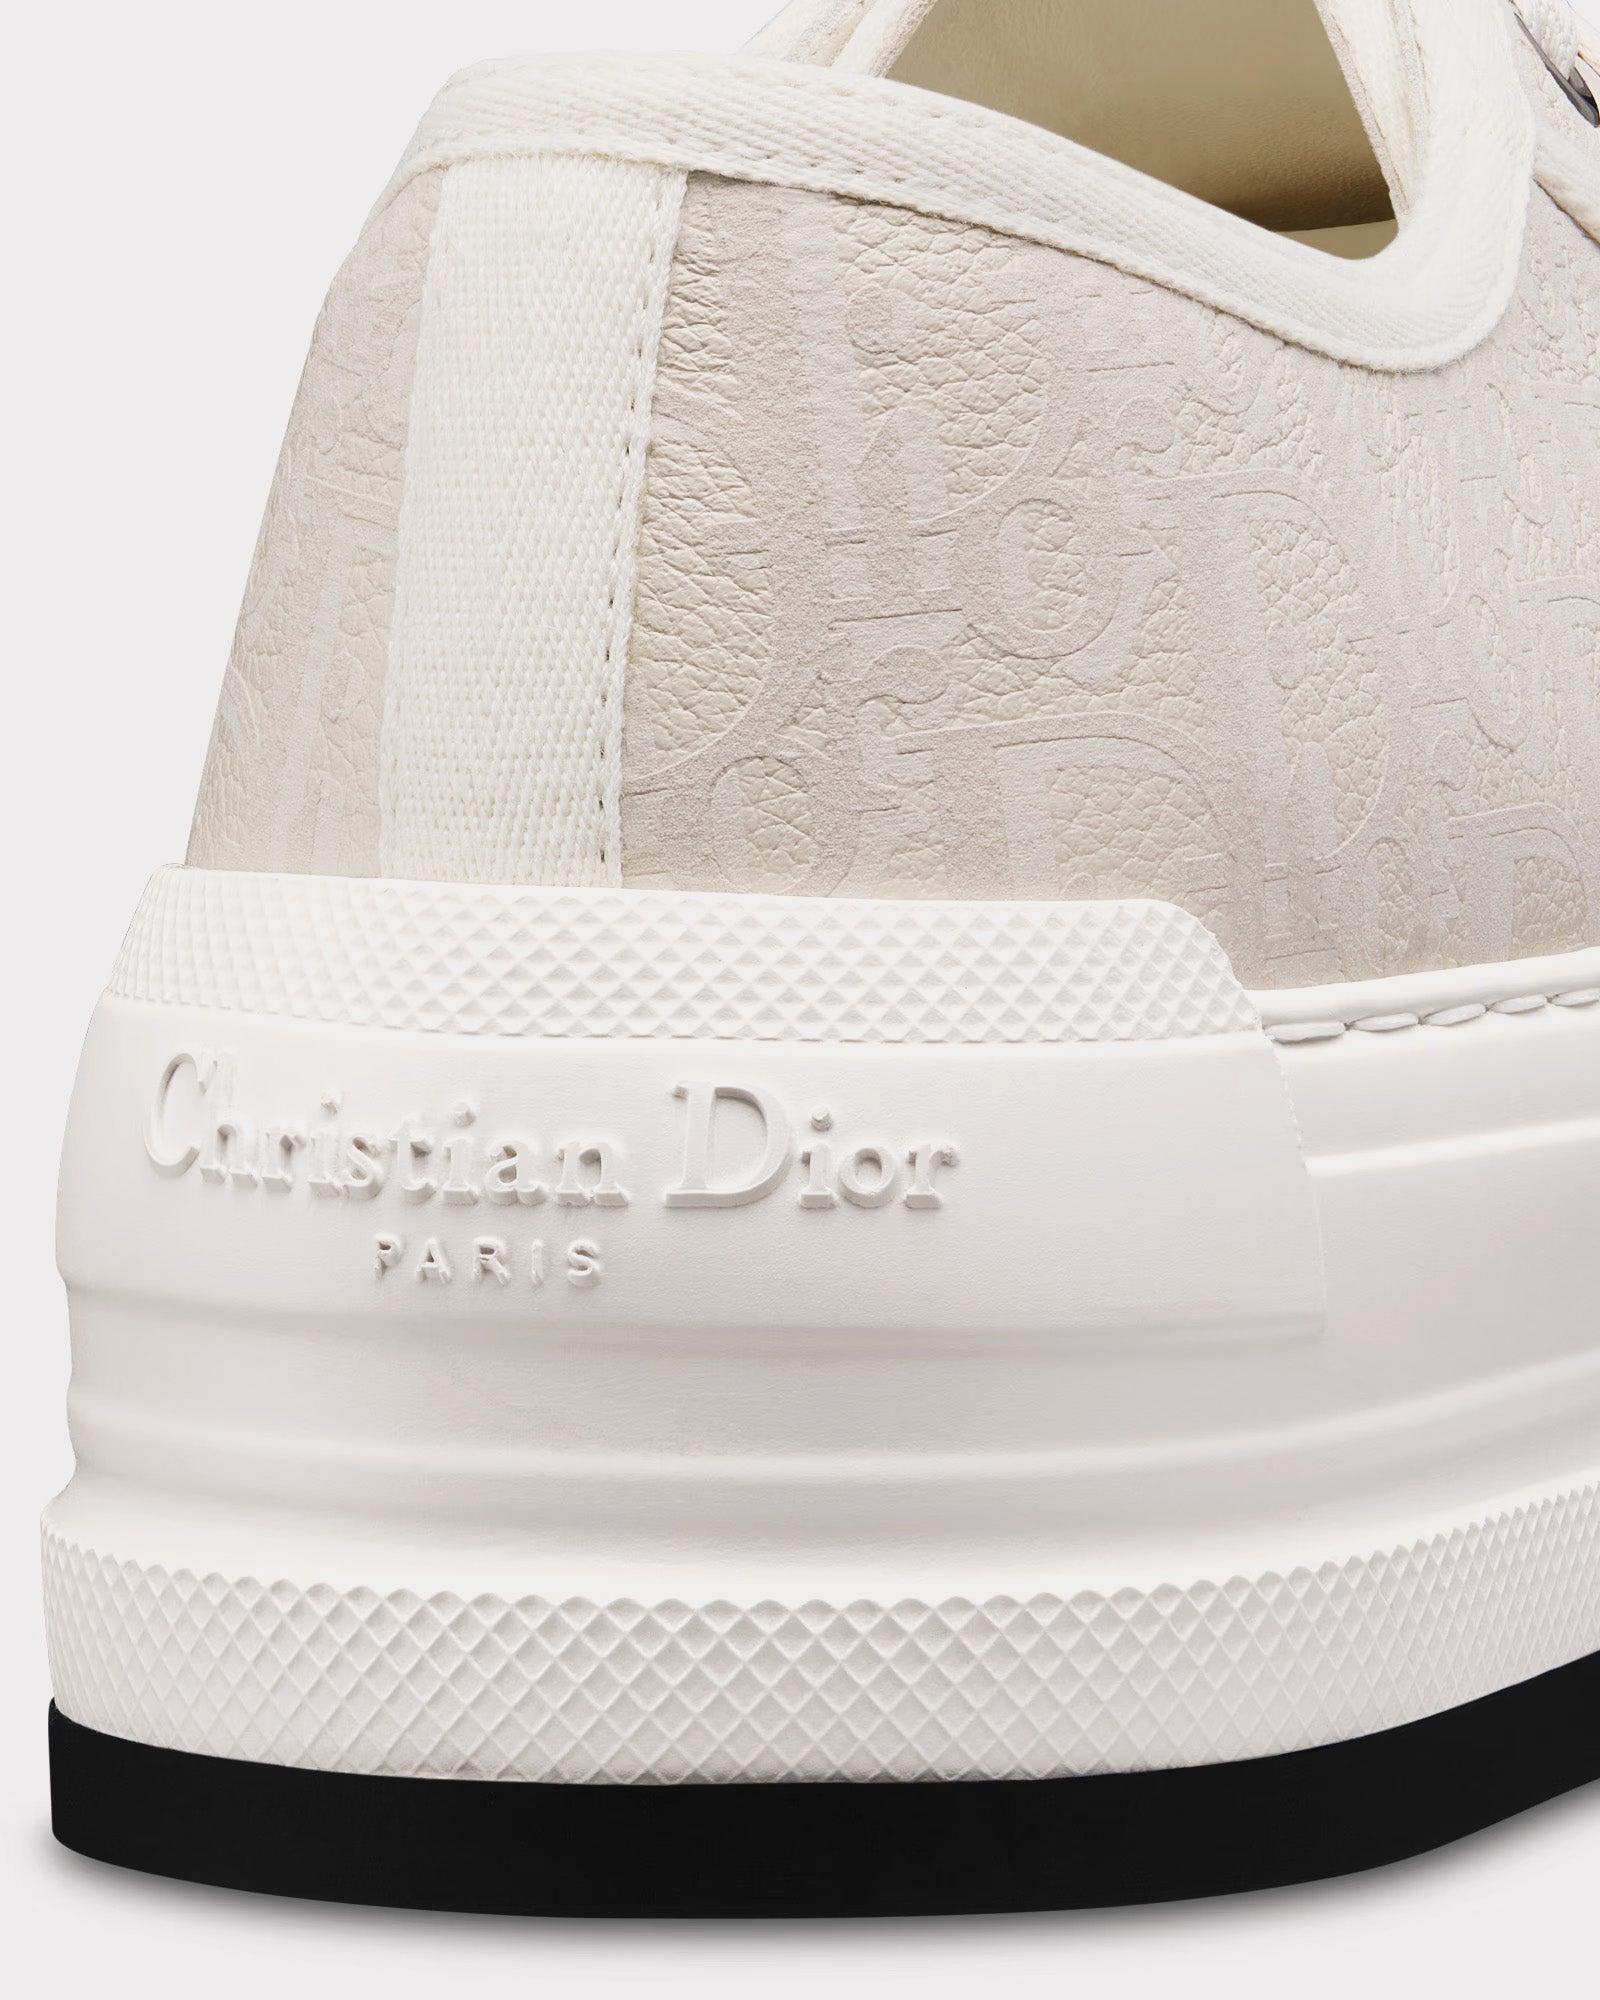 Dior - Walk'n'Dior Platform White Calfskin Textured with Dior Oblique Motif and Embroidered Cotton Low Top Sneakers